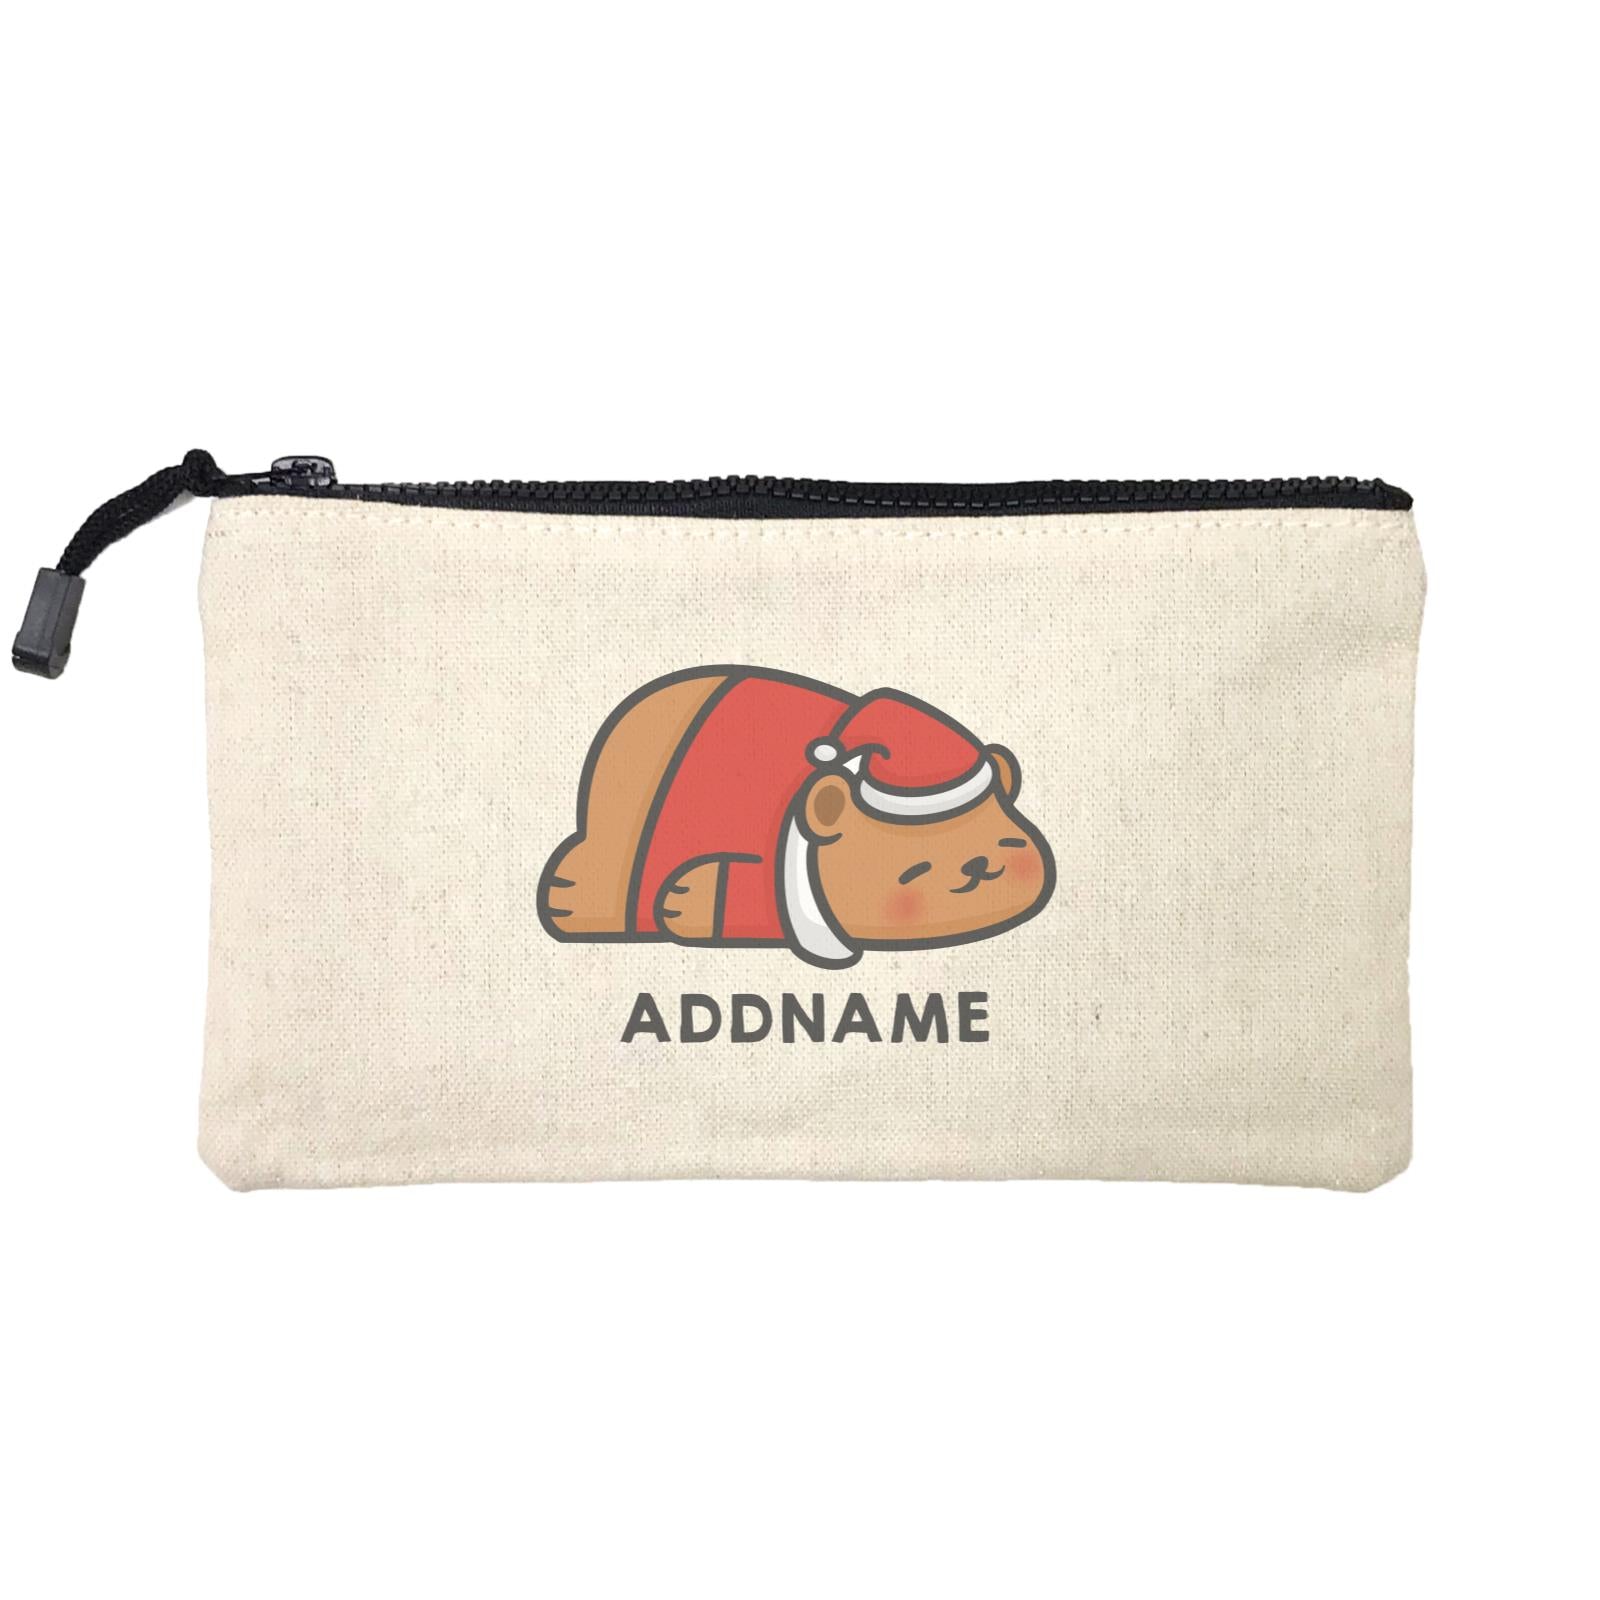 Xmas Cute Sleeping Bear Addname Mini Accessories Stationery Pouch